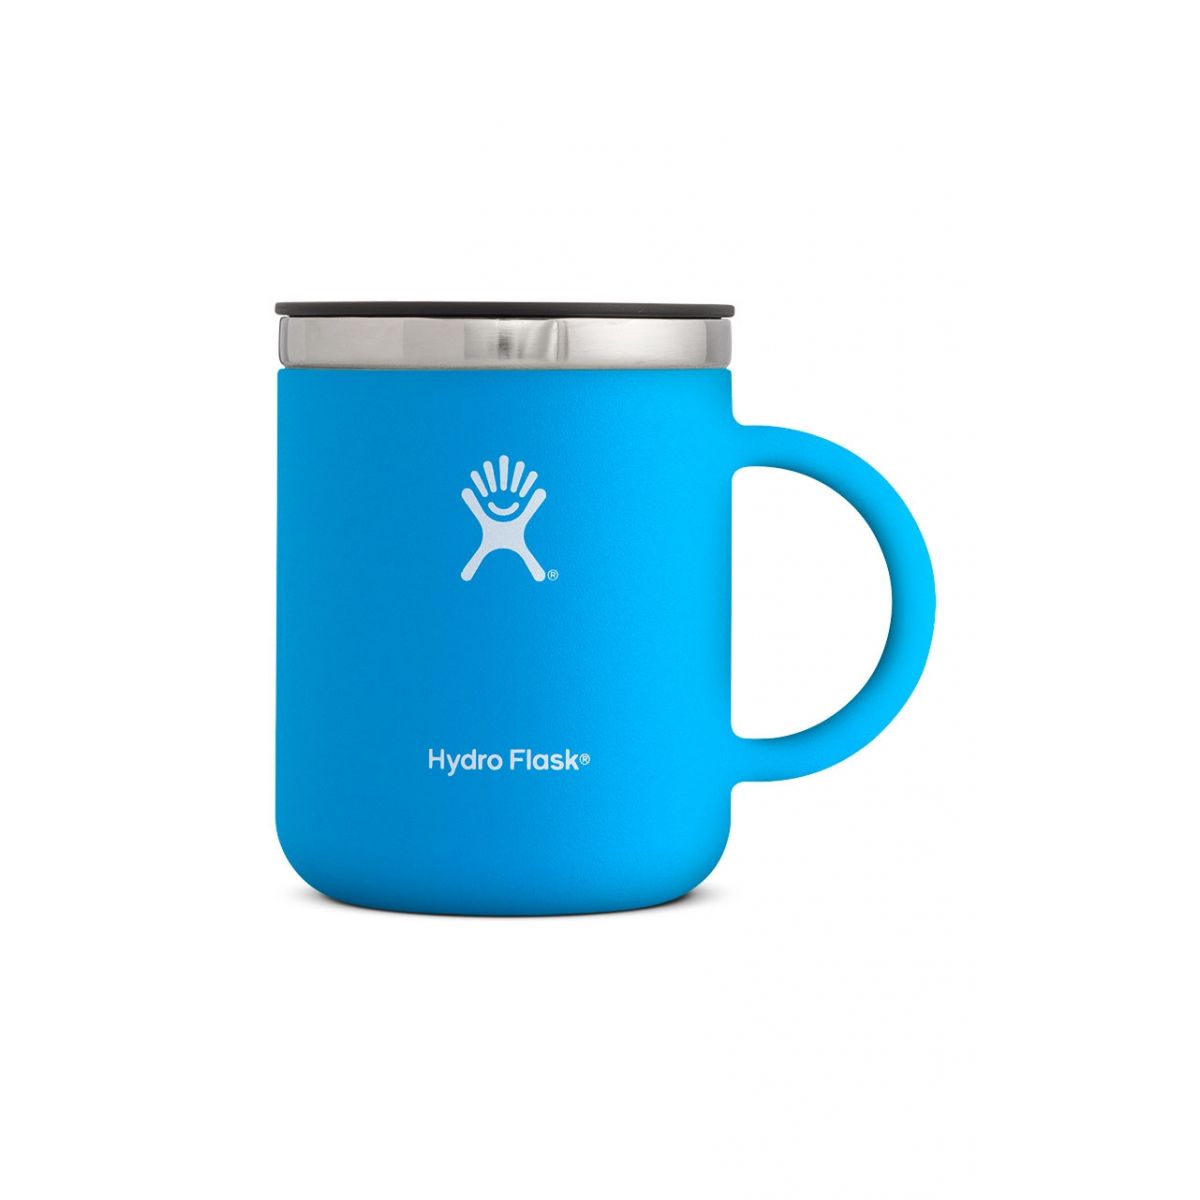 https://secure.touchnet.net/C20496_ustores/web/uploaded_images/store_2/hydro-flask-stainless-steel-vacuum-insulated-12-oz-coffee-mug-pacific_1.jpg